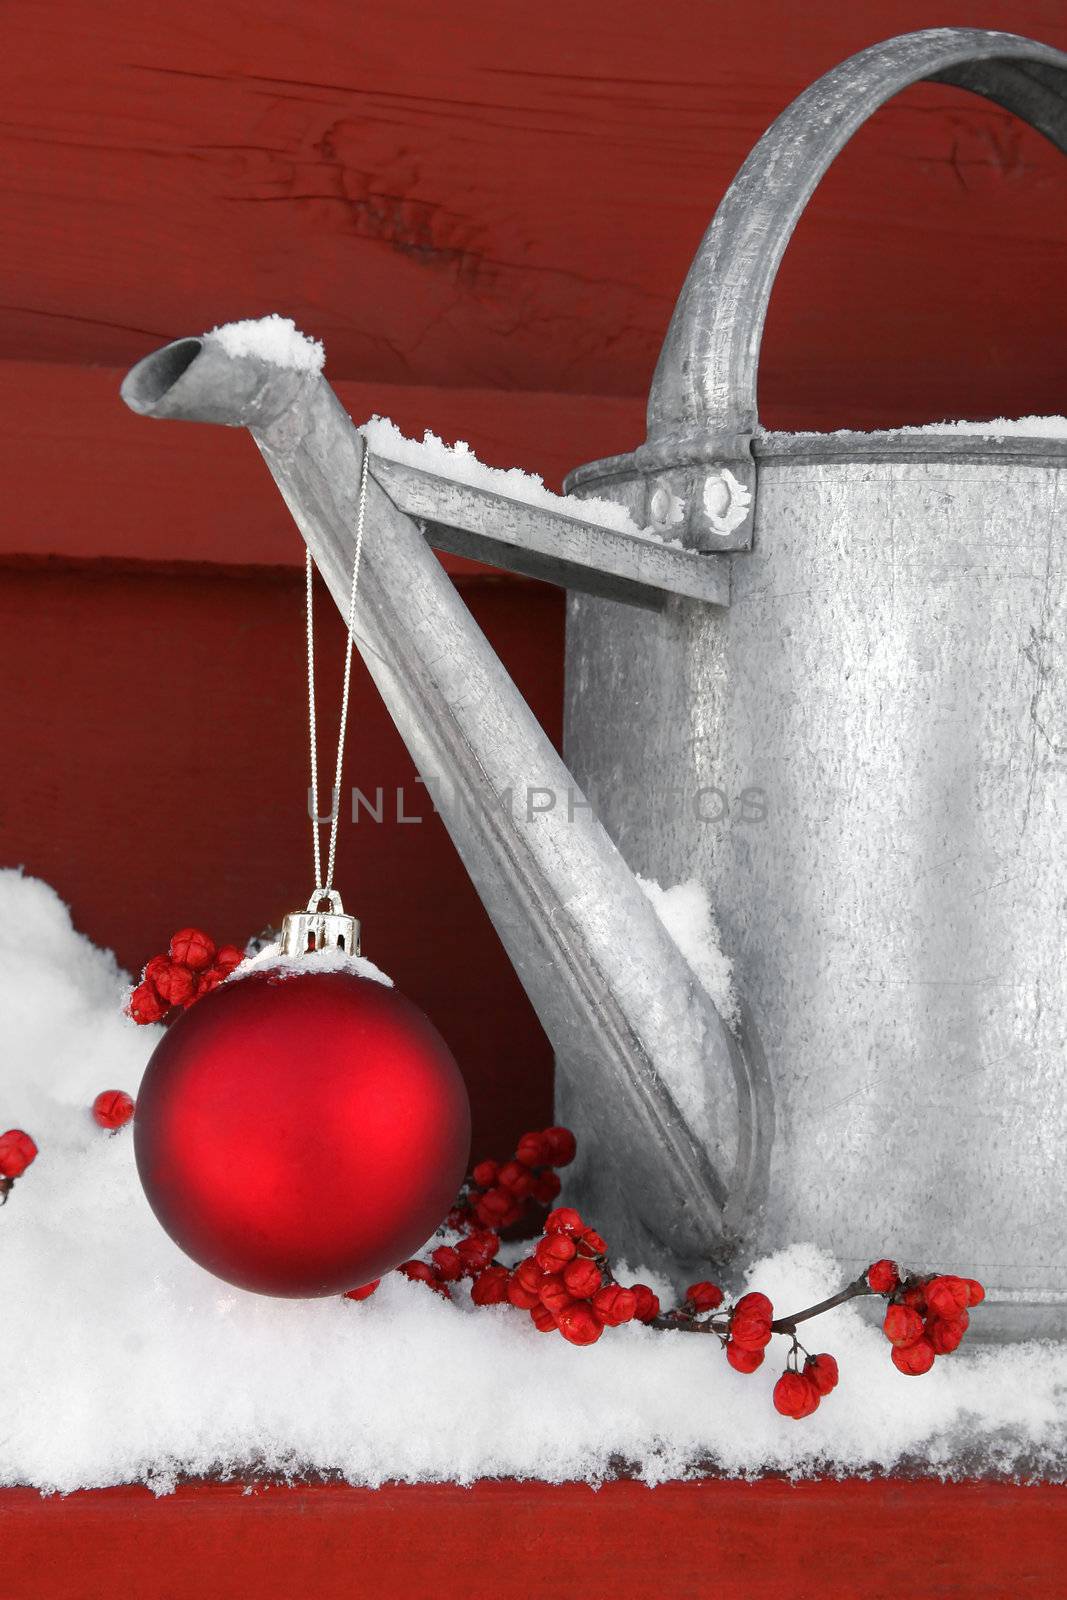 Red ornament on watering can by Sandralise